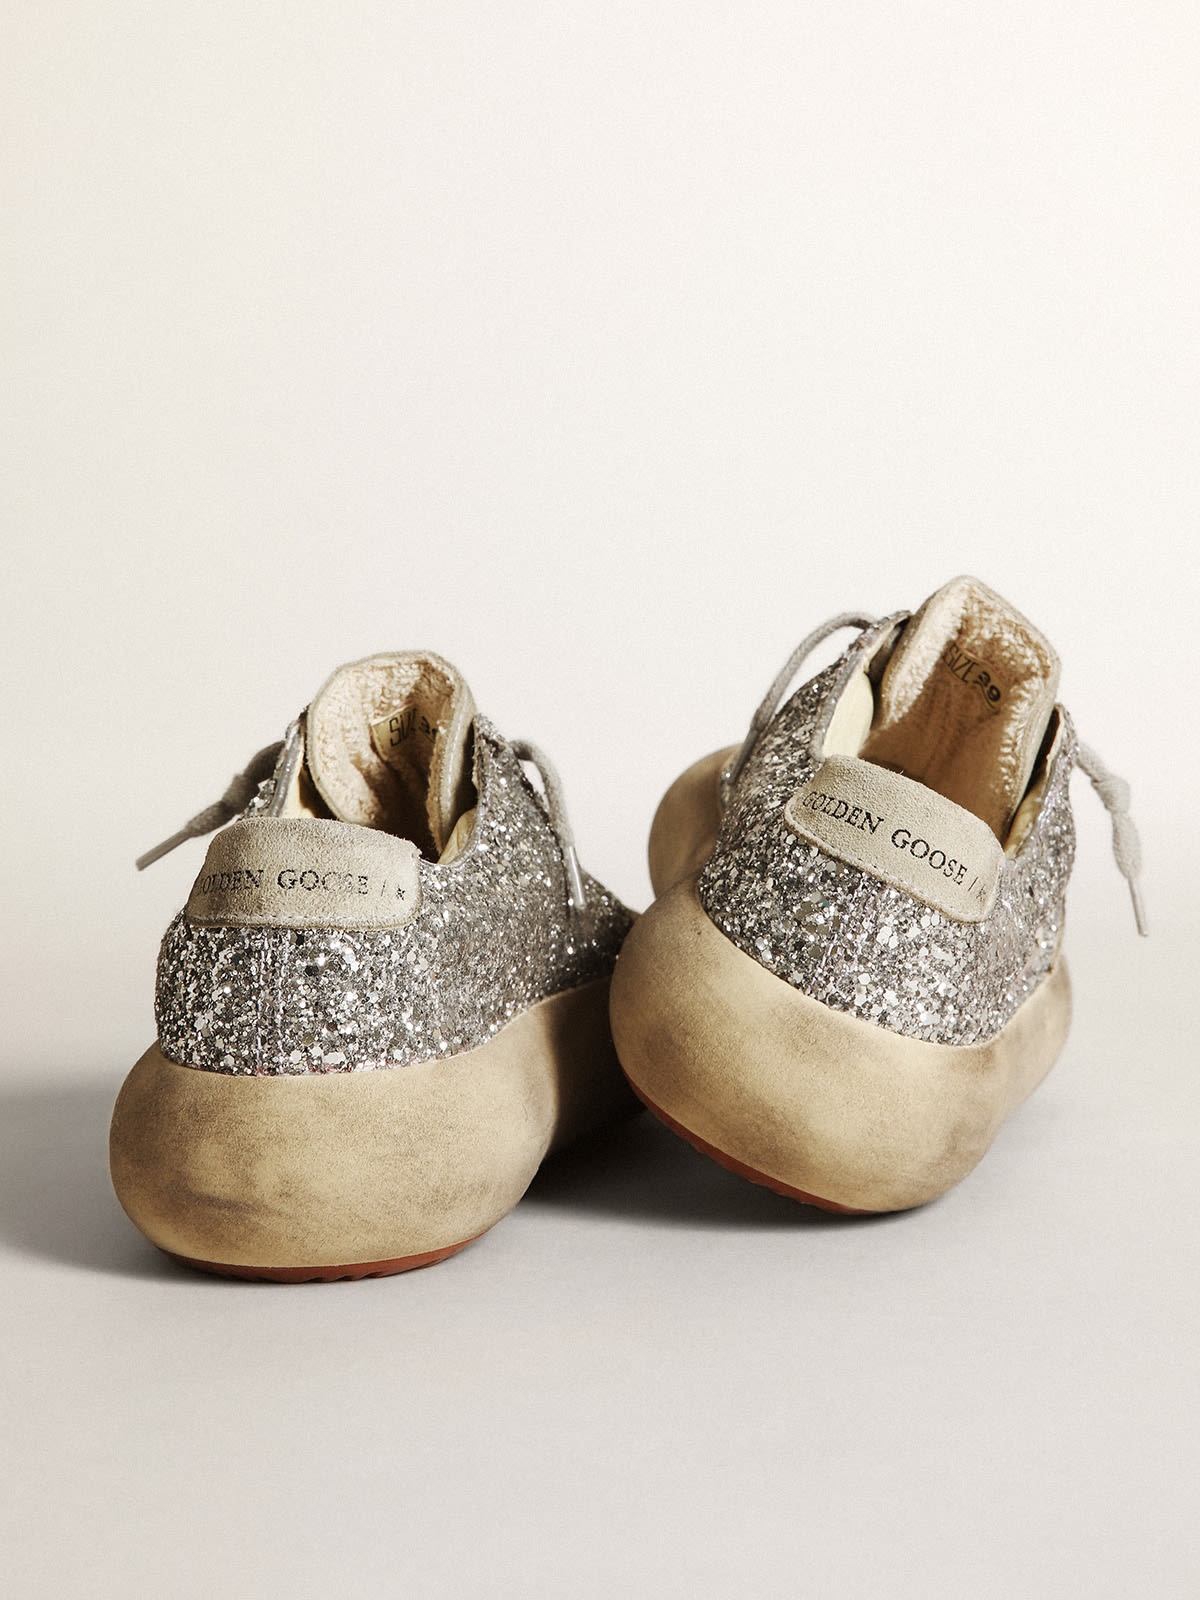 Space-Star shoes in silver glitter with ice-gray suede star and heel tab - 5